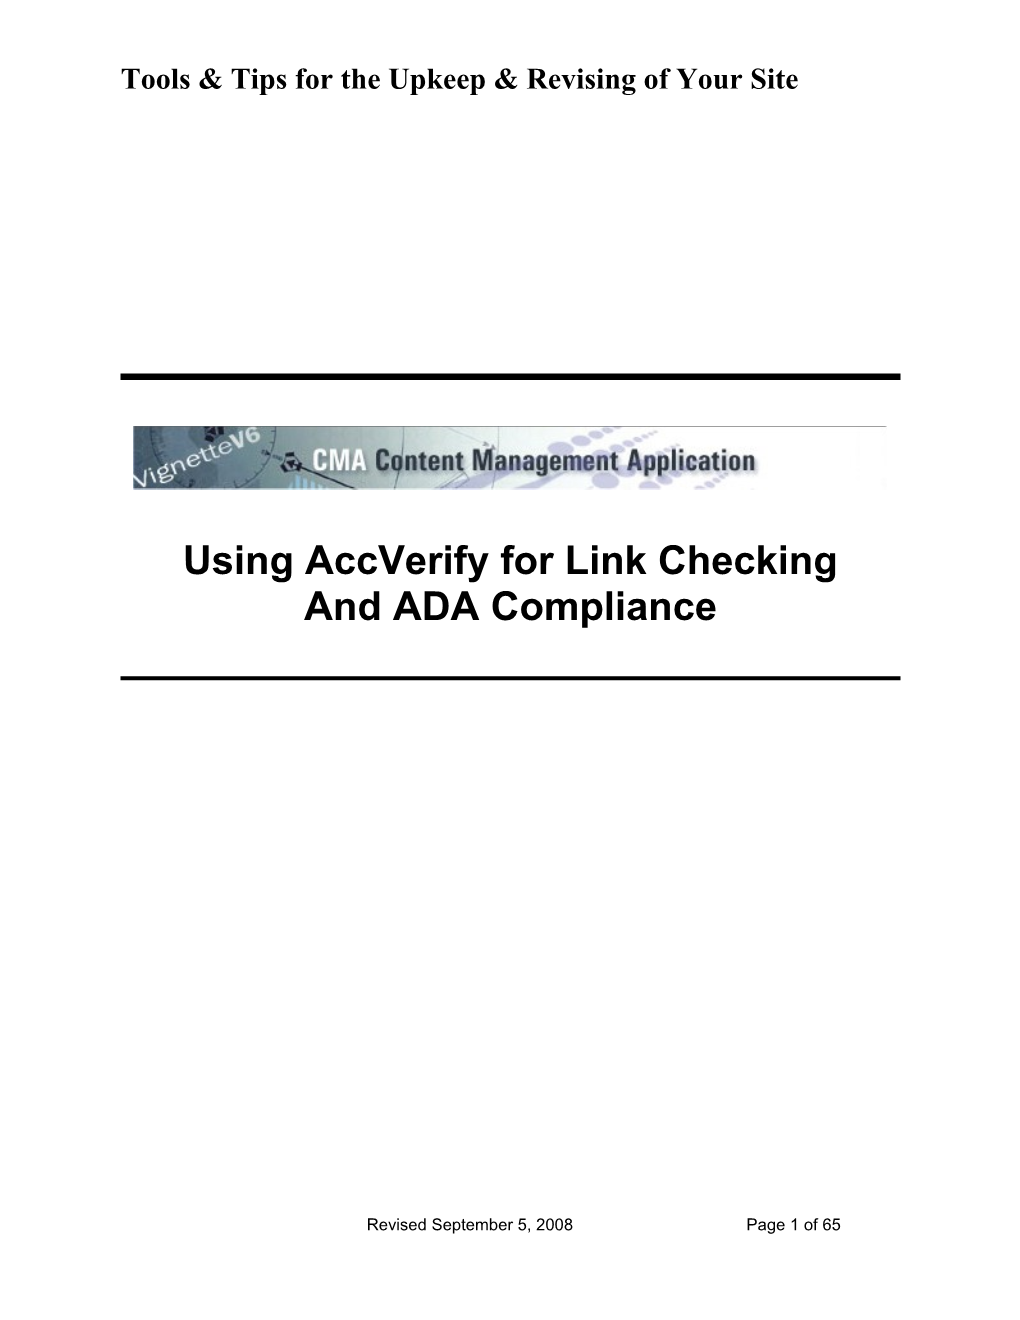 Using Accverify for Link Checking and ADA Compliance